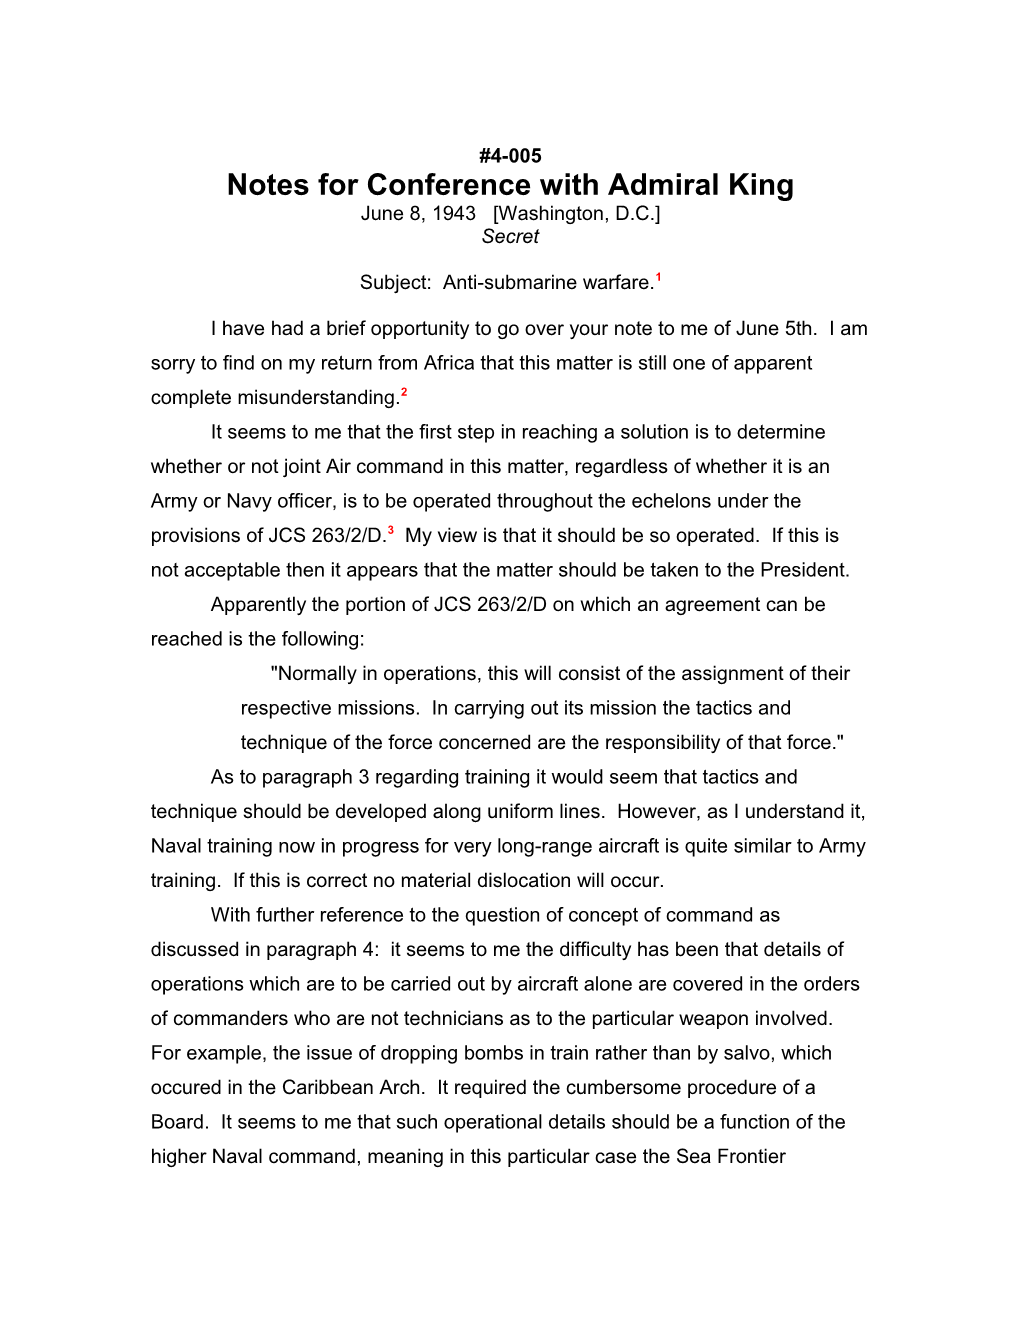 Notes for Conference with Admiral King